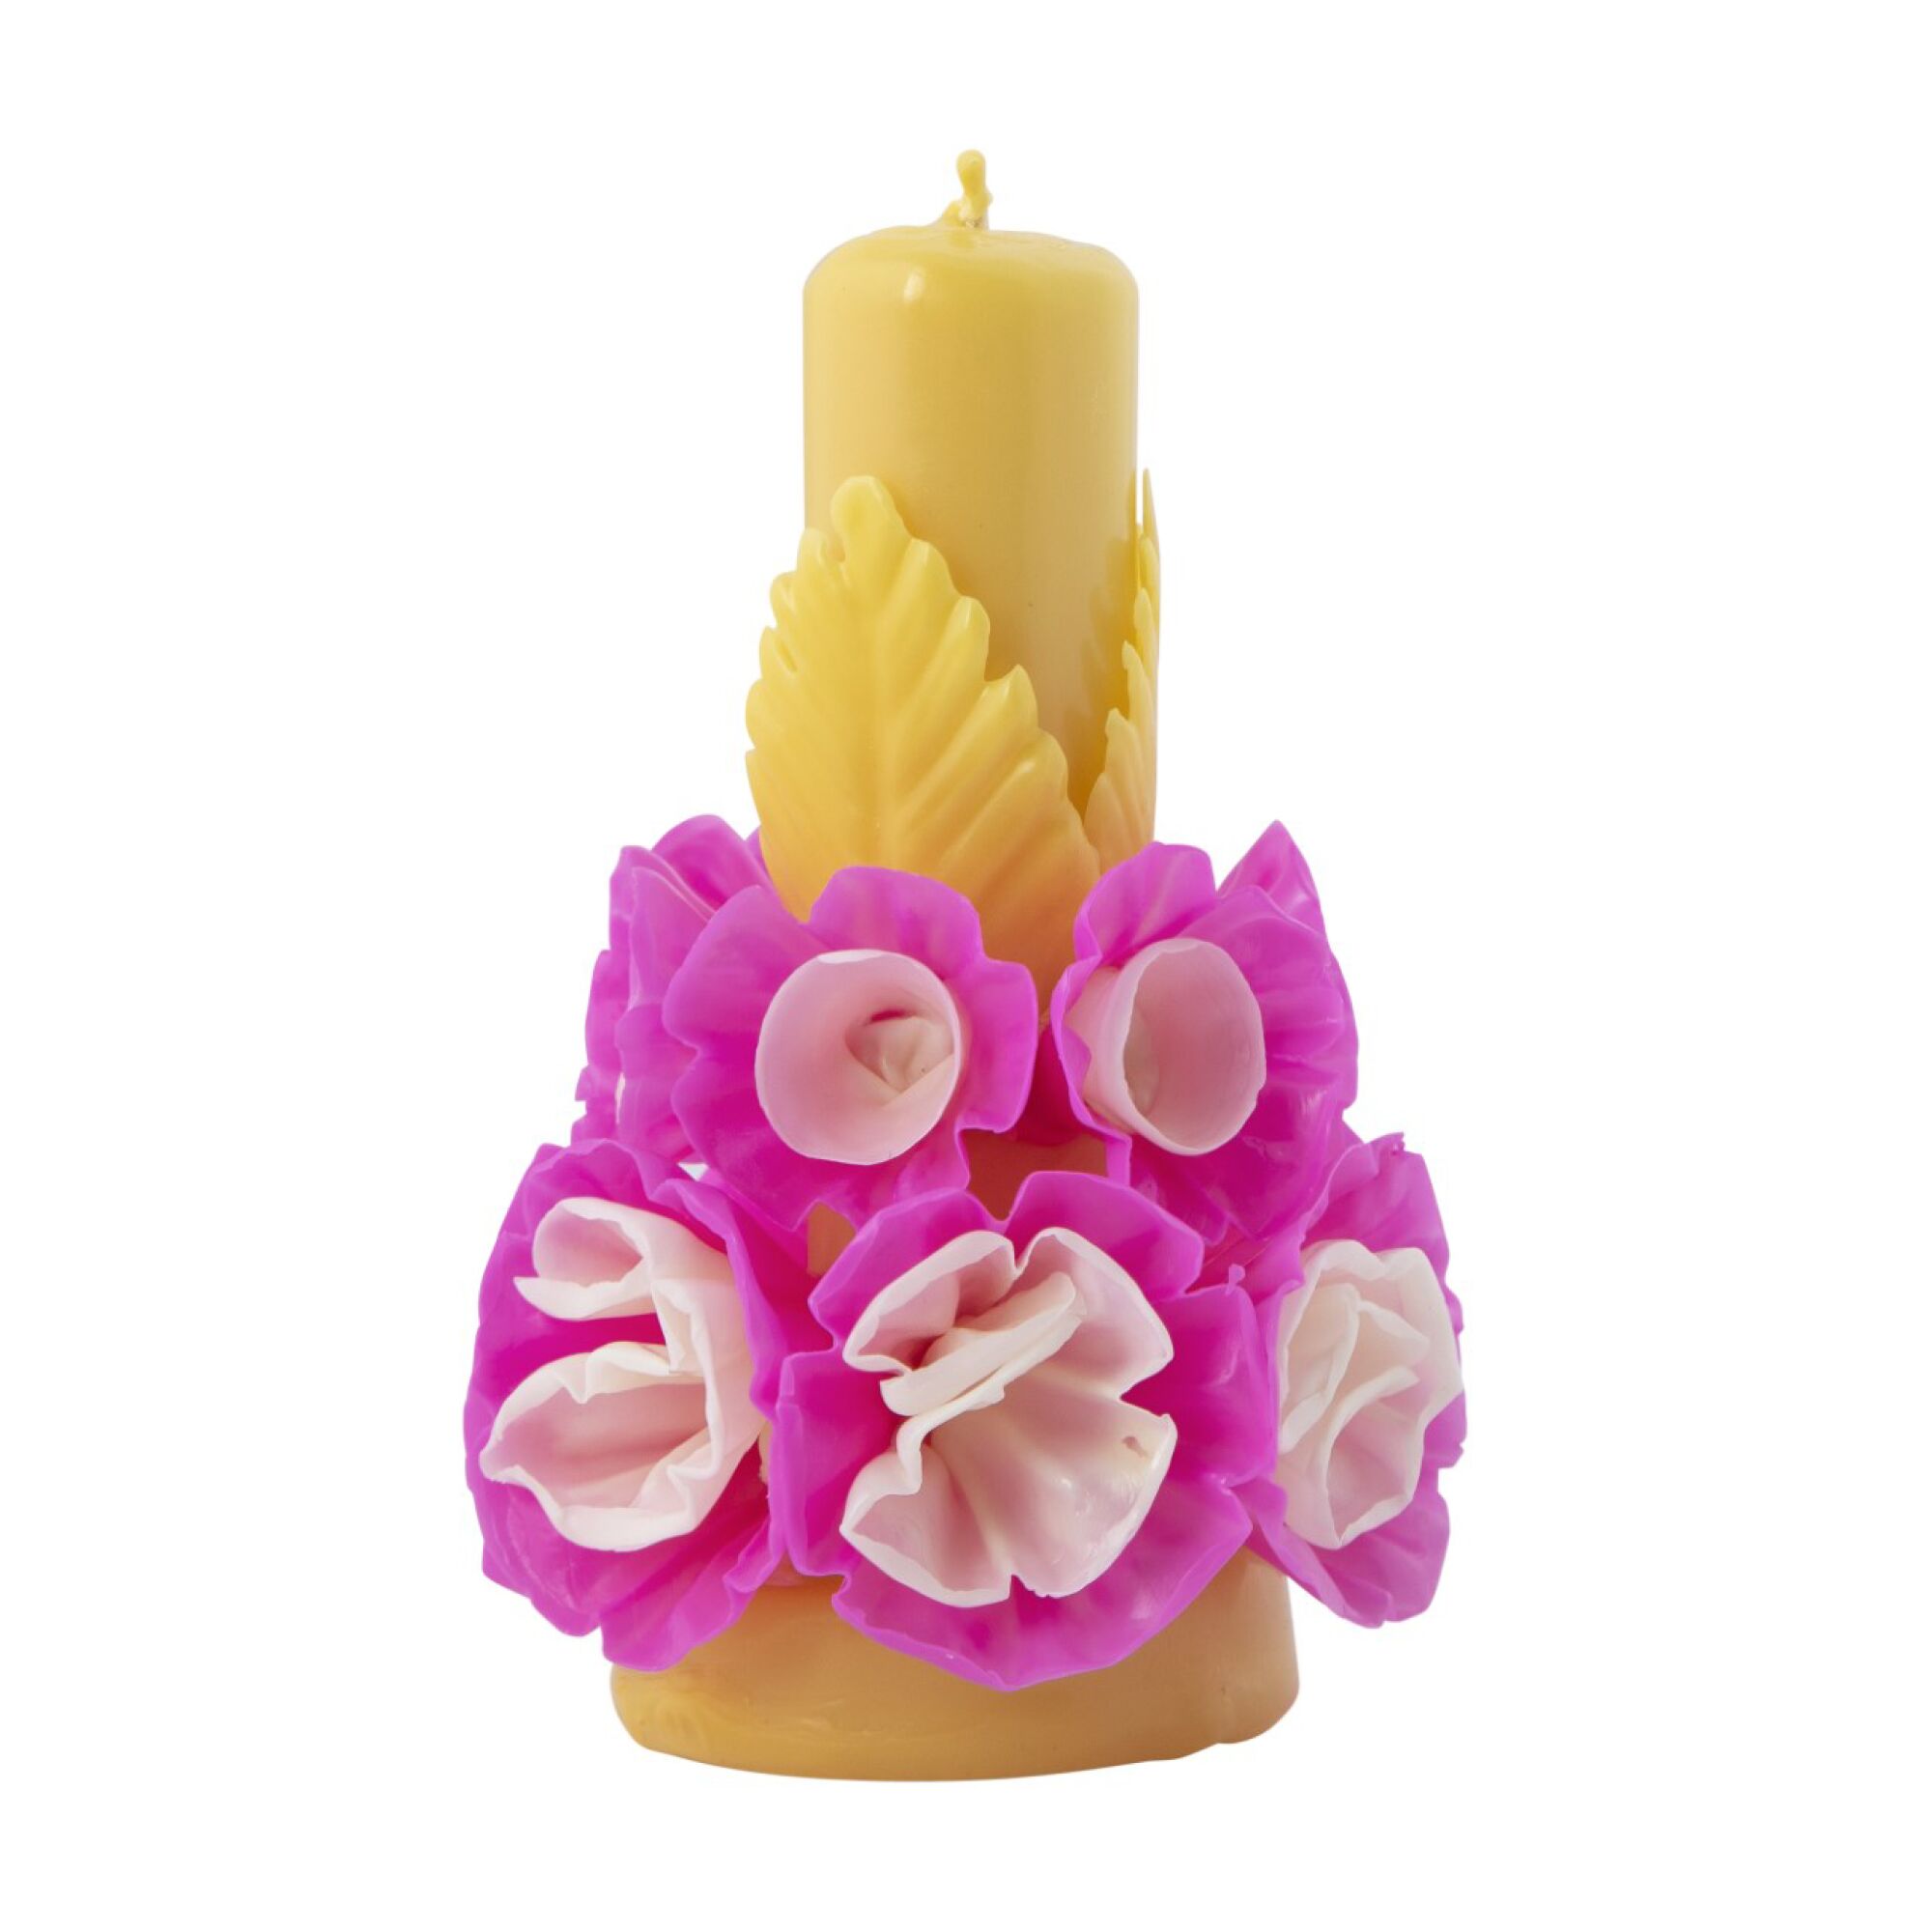 Wax floral candle